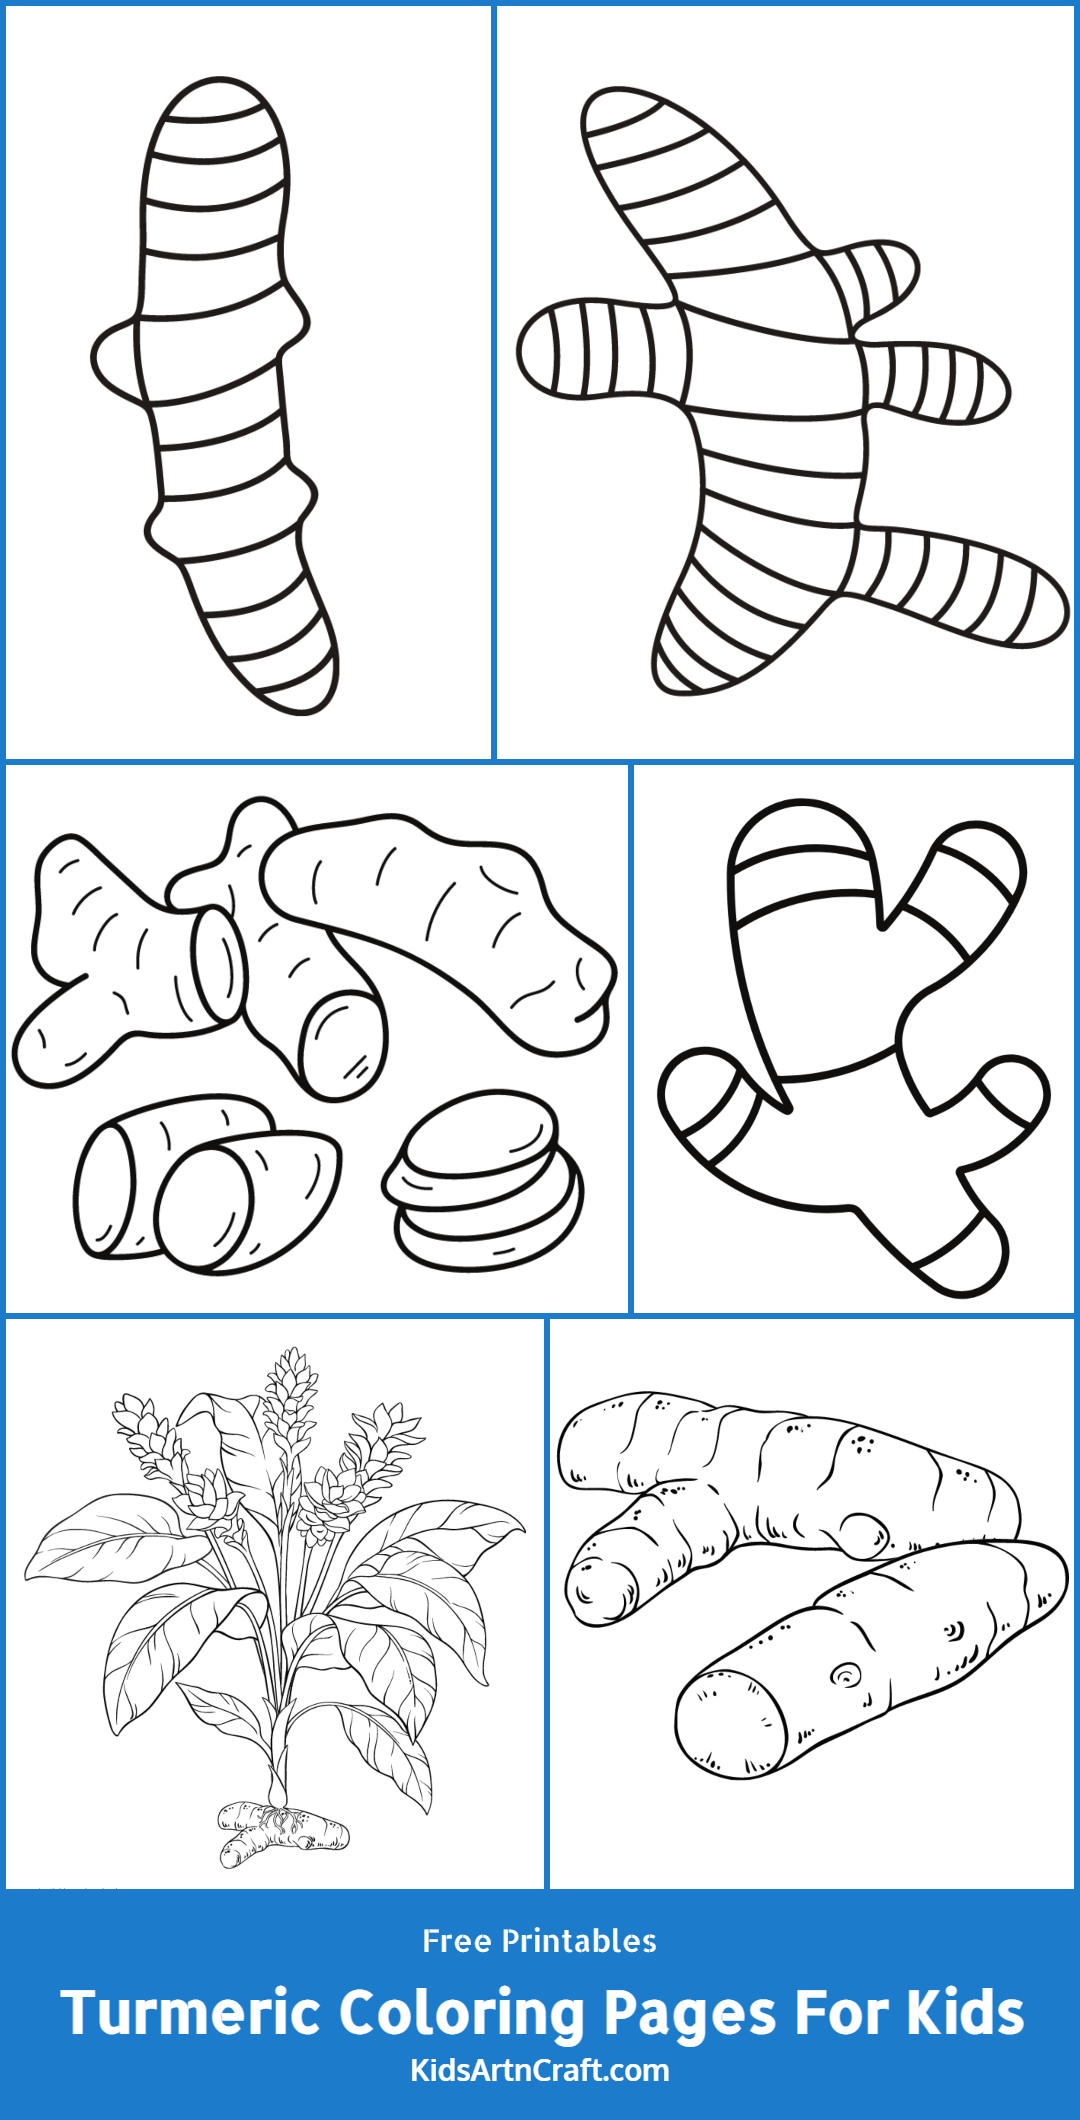 Turmeric Coloring Pages For Kids – Free Printables